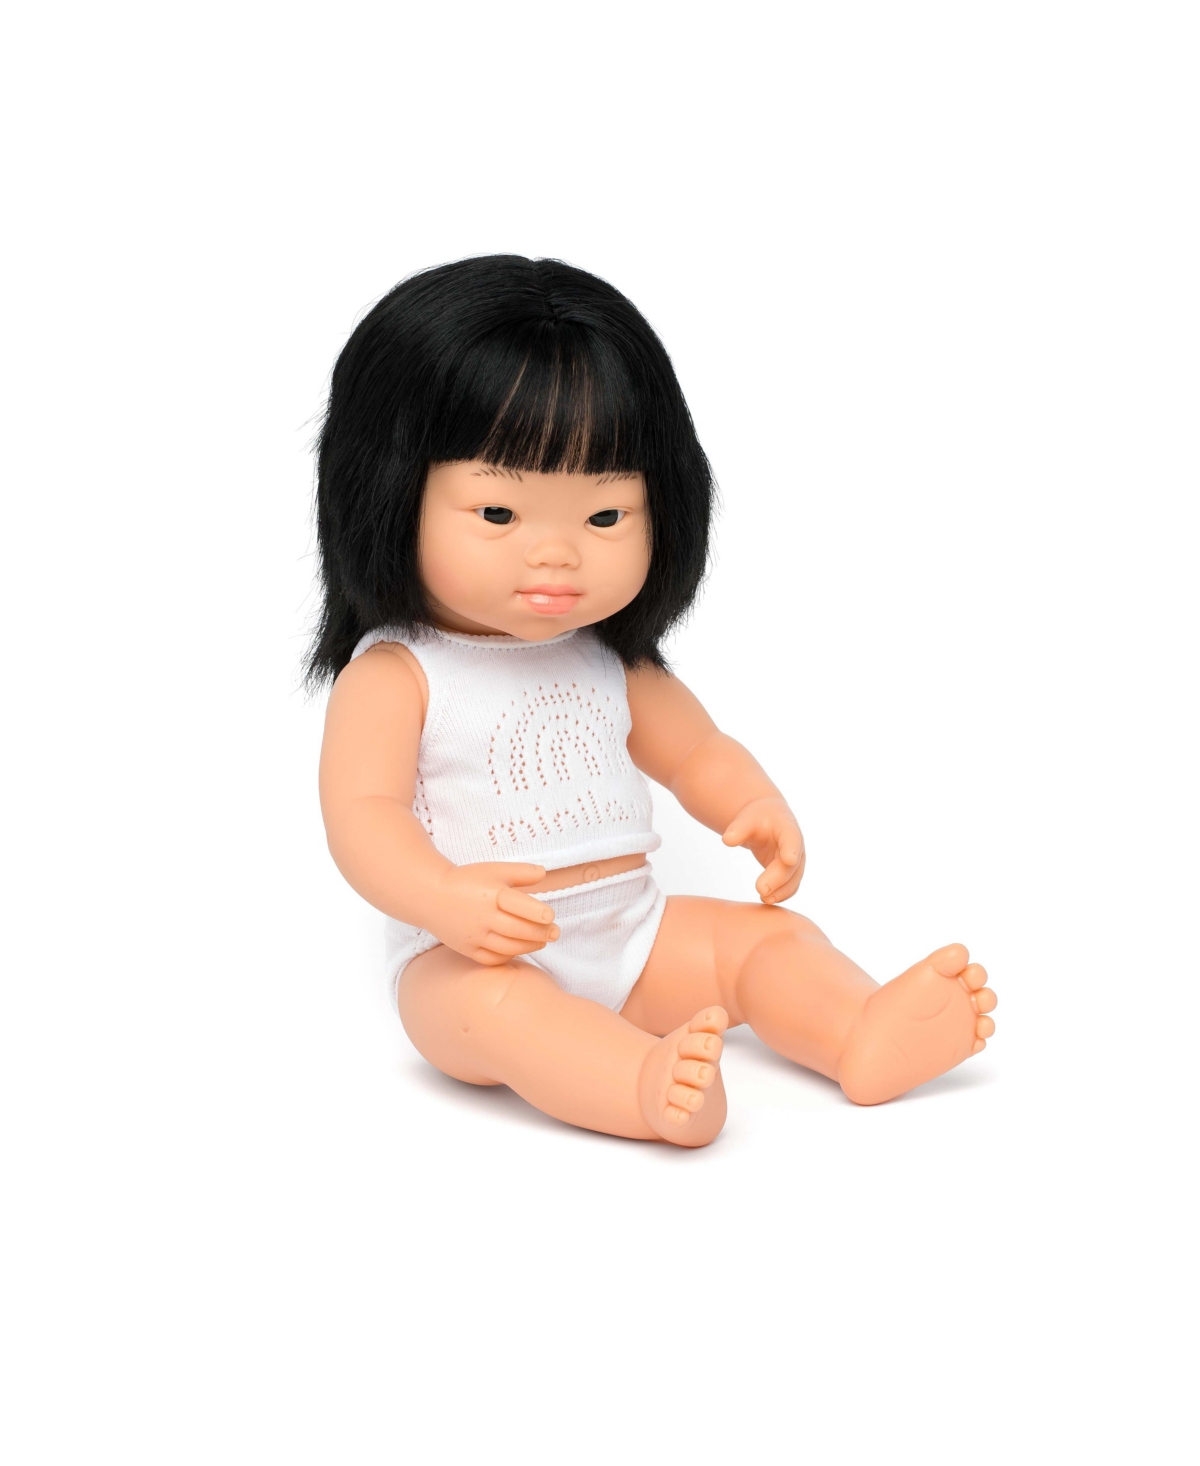 Miniland Kids' Baby Girl 15" Asian Doll With Down Syndrome In Orange